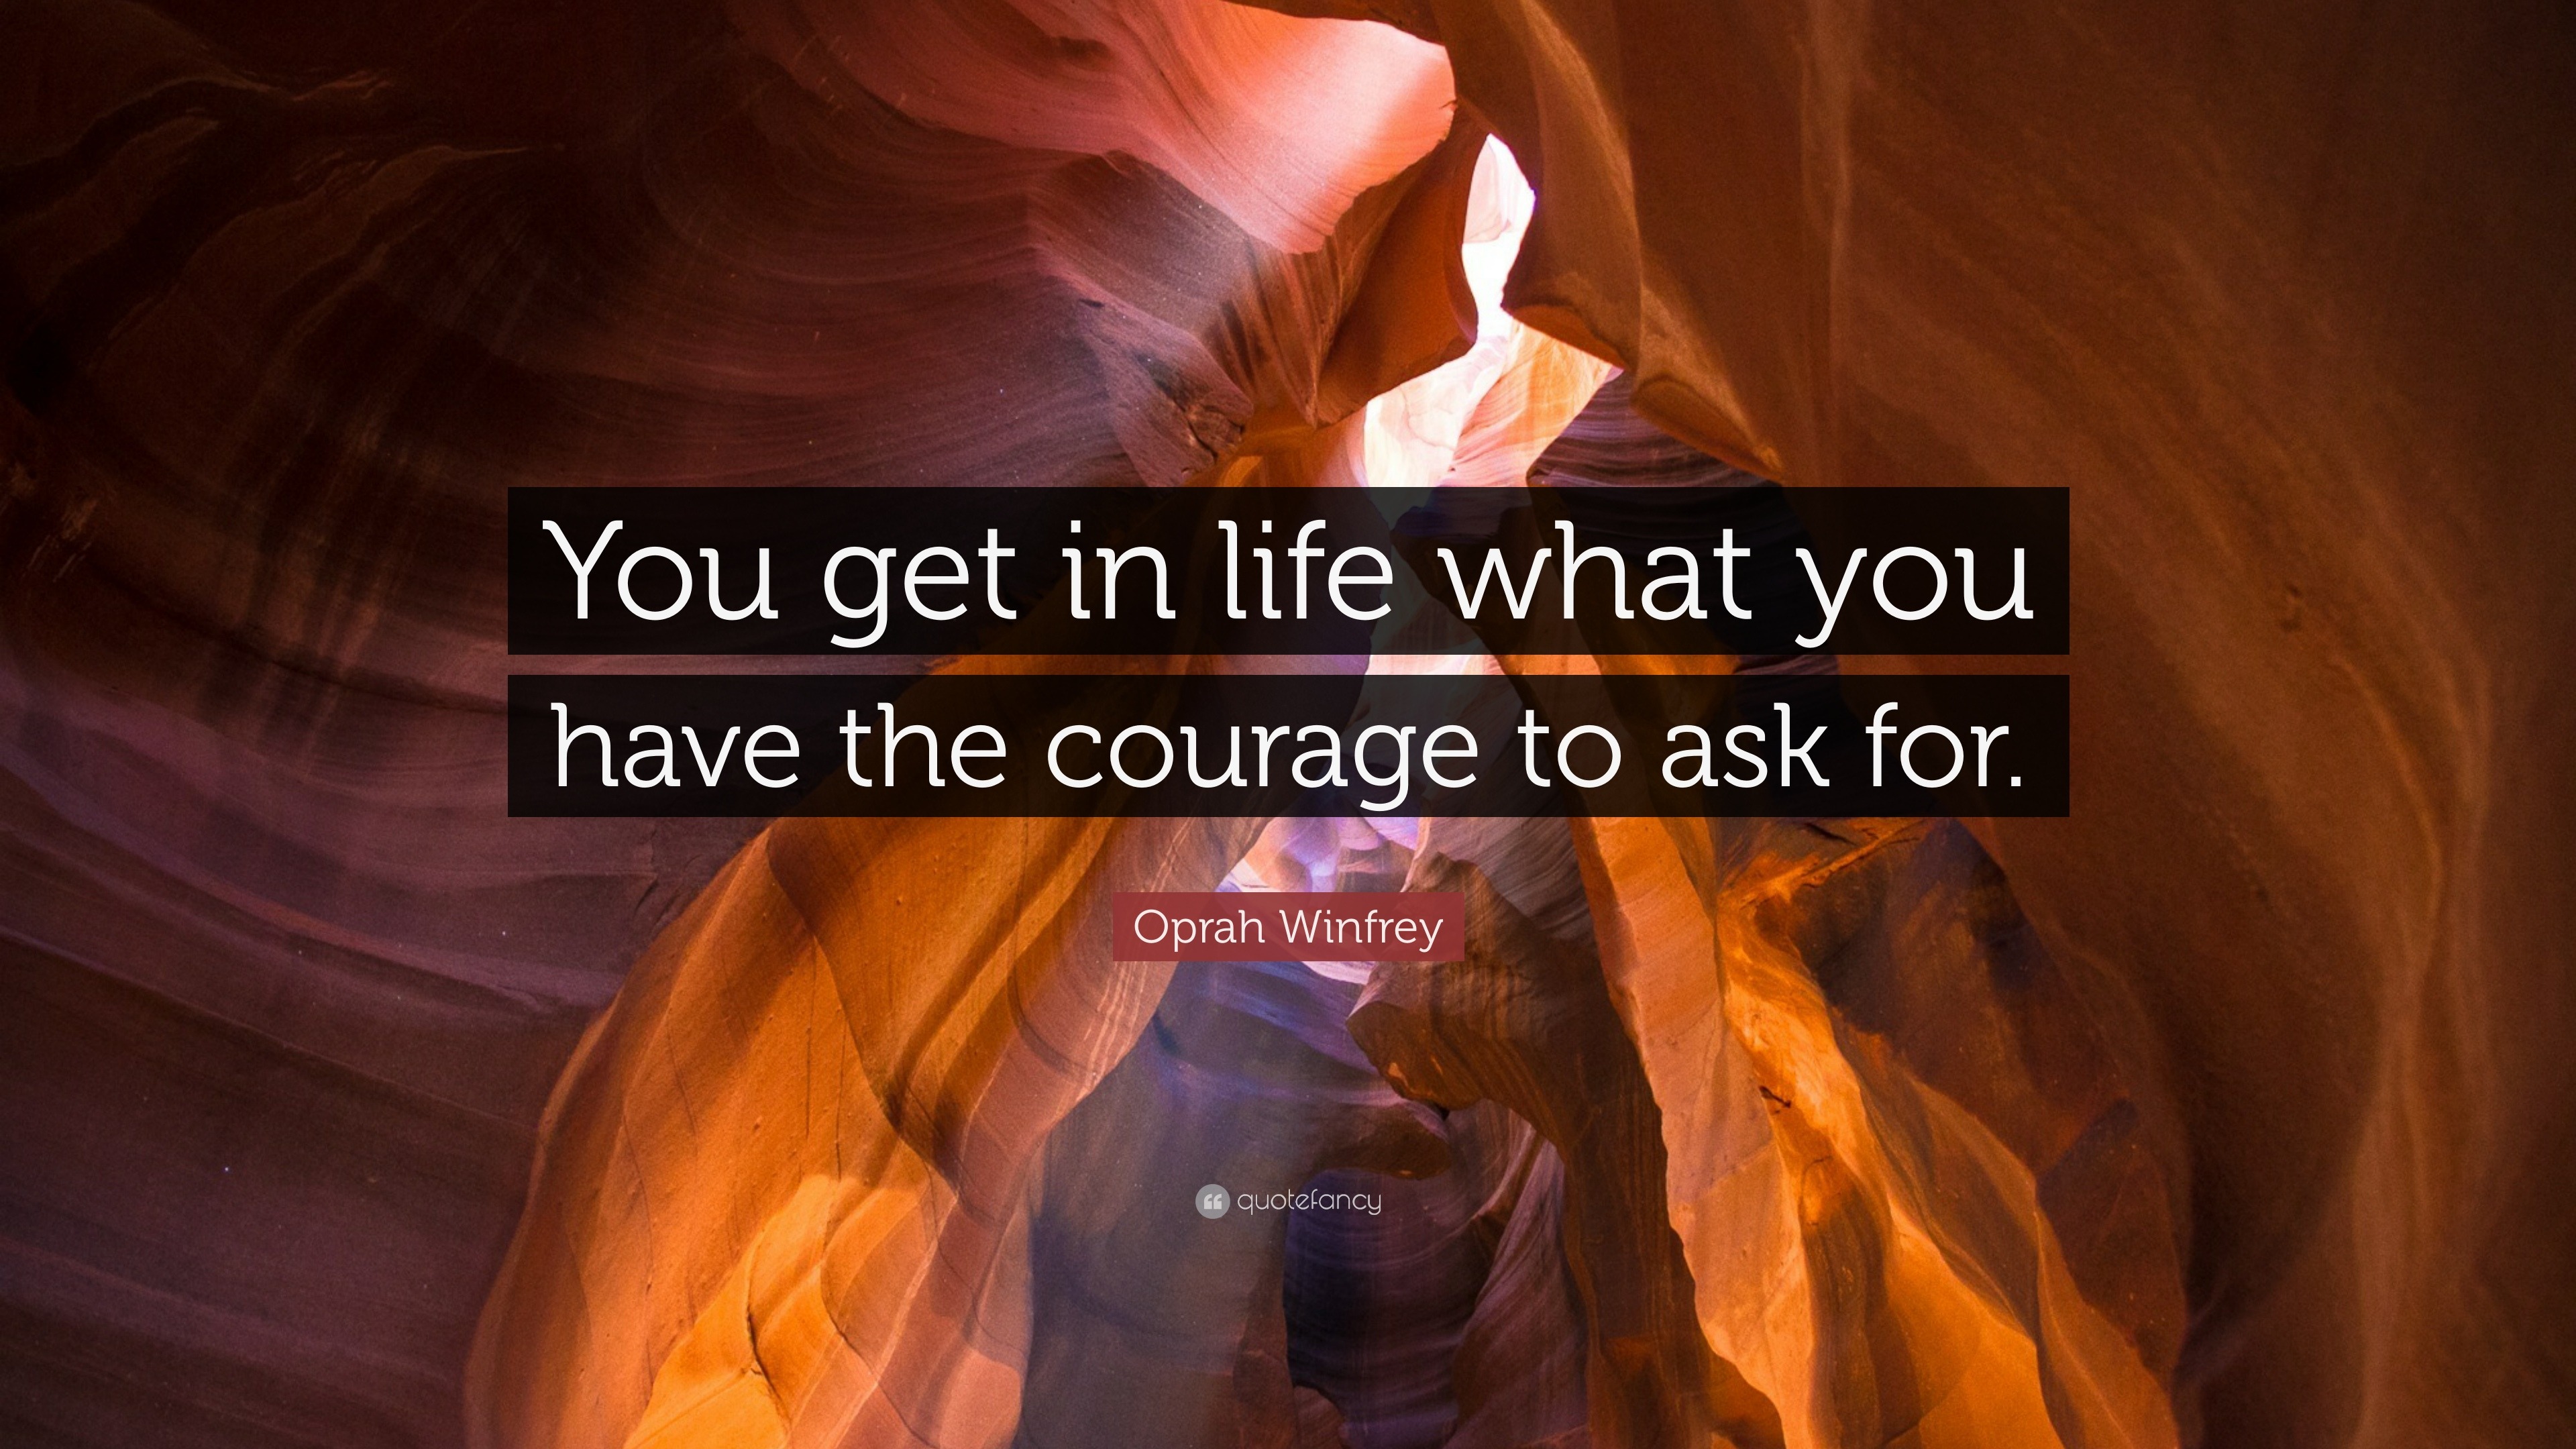 Oprah Winfrey Quote: "You get in life what you have the ...